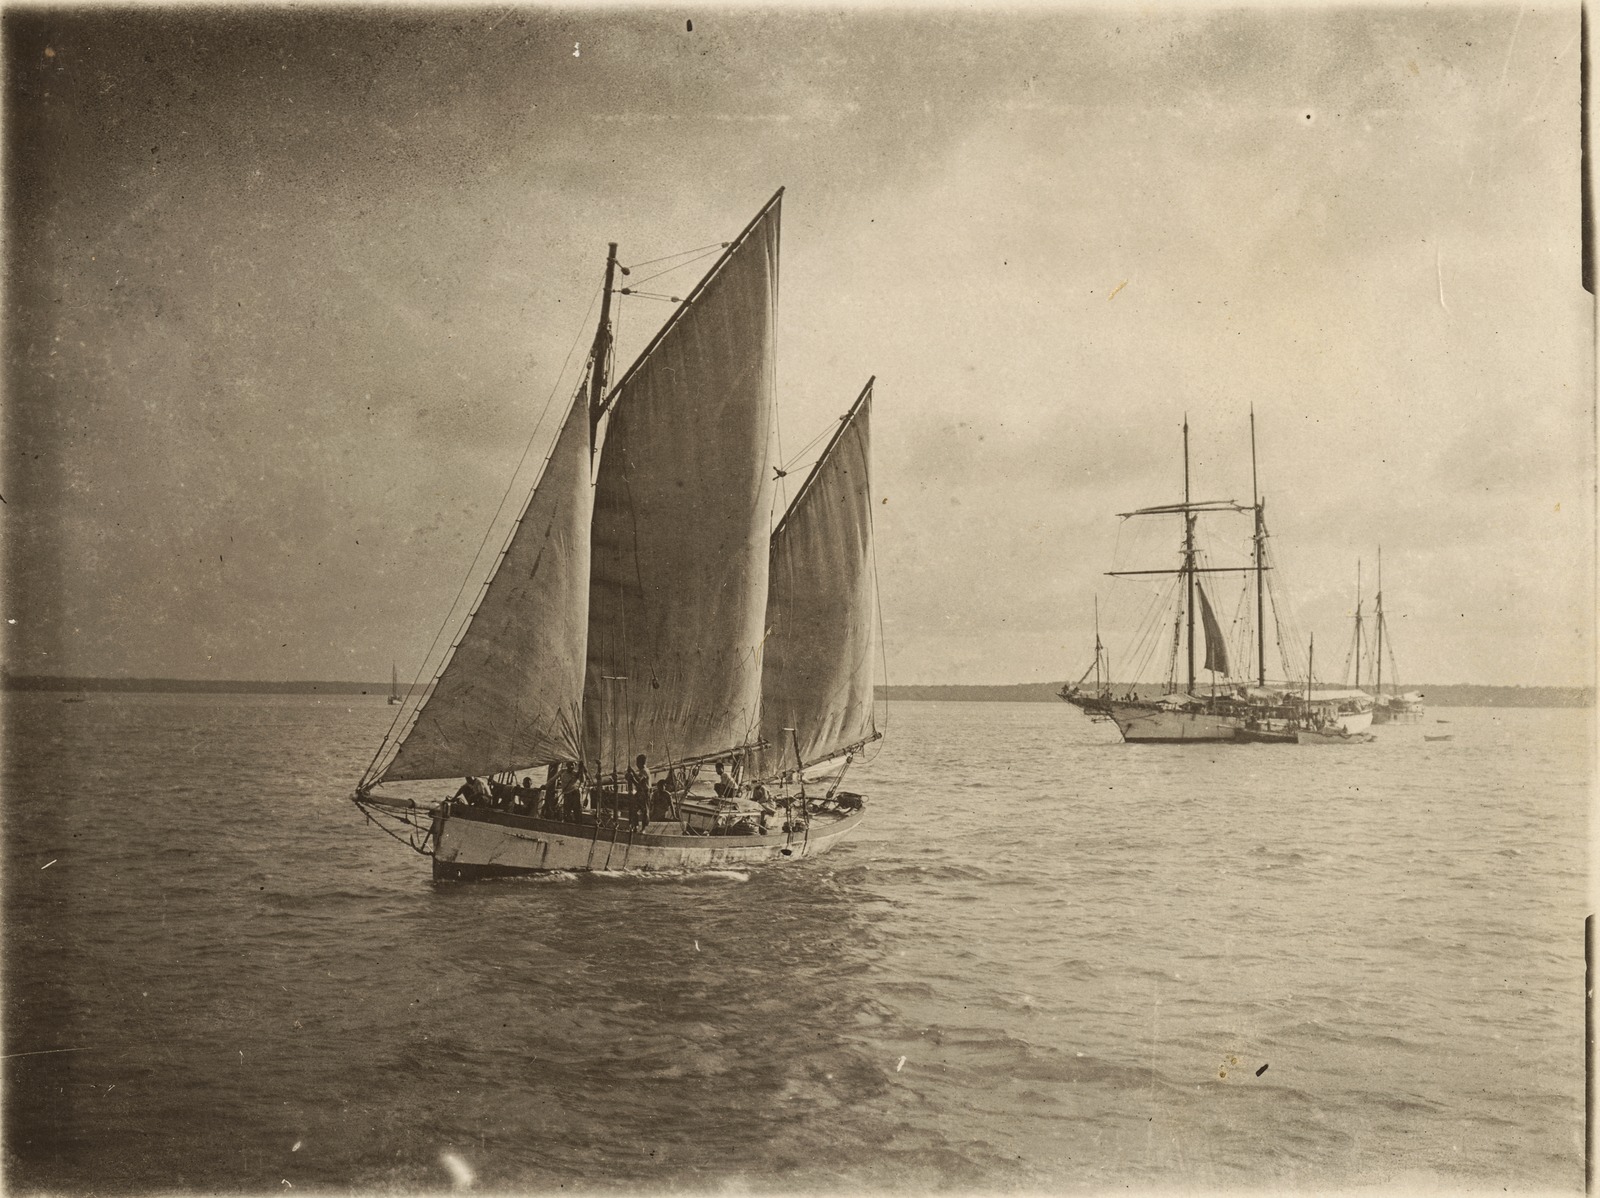 Sails unfurled on a Torres boat with a topsail schooner at anchor, Aru Islands Regency, 1908